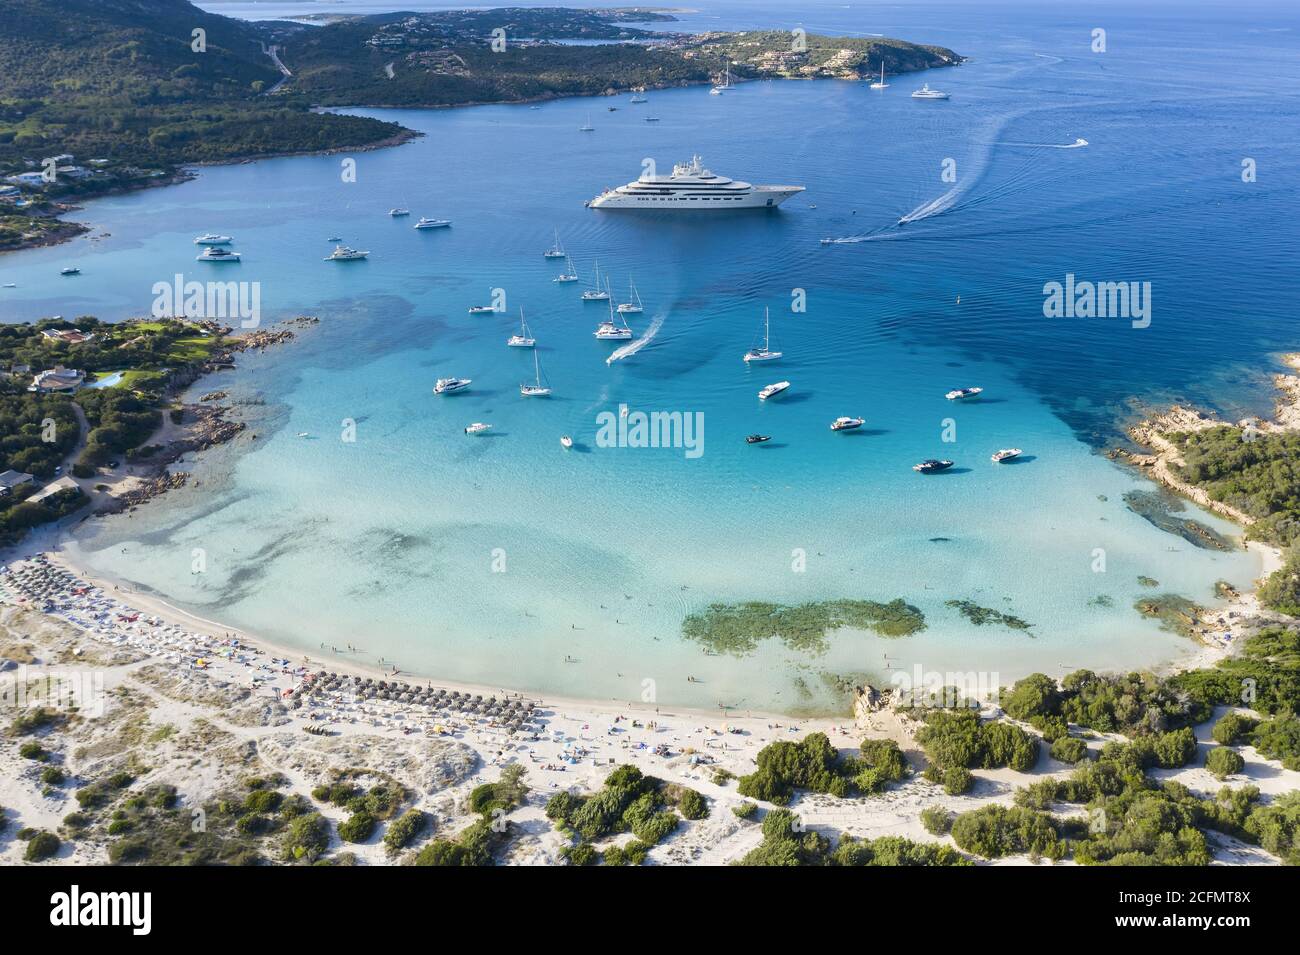 View from above, stunning aerial view of the Grande Pevero beach with boats and luxury yachts sailing on a turquoise, clear water. Sardinia, Italy. Stock Photo